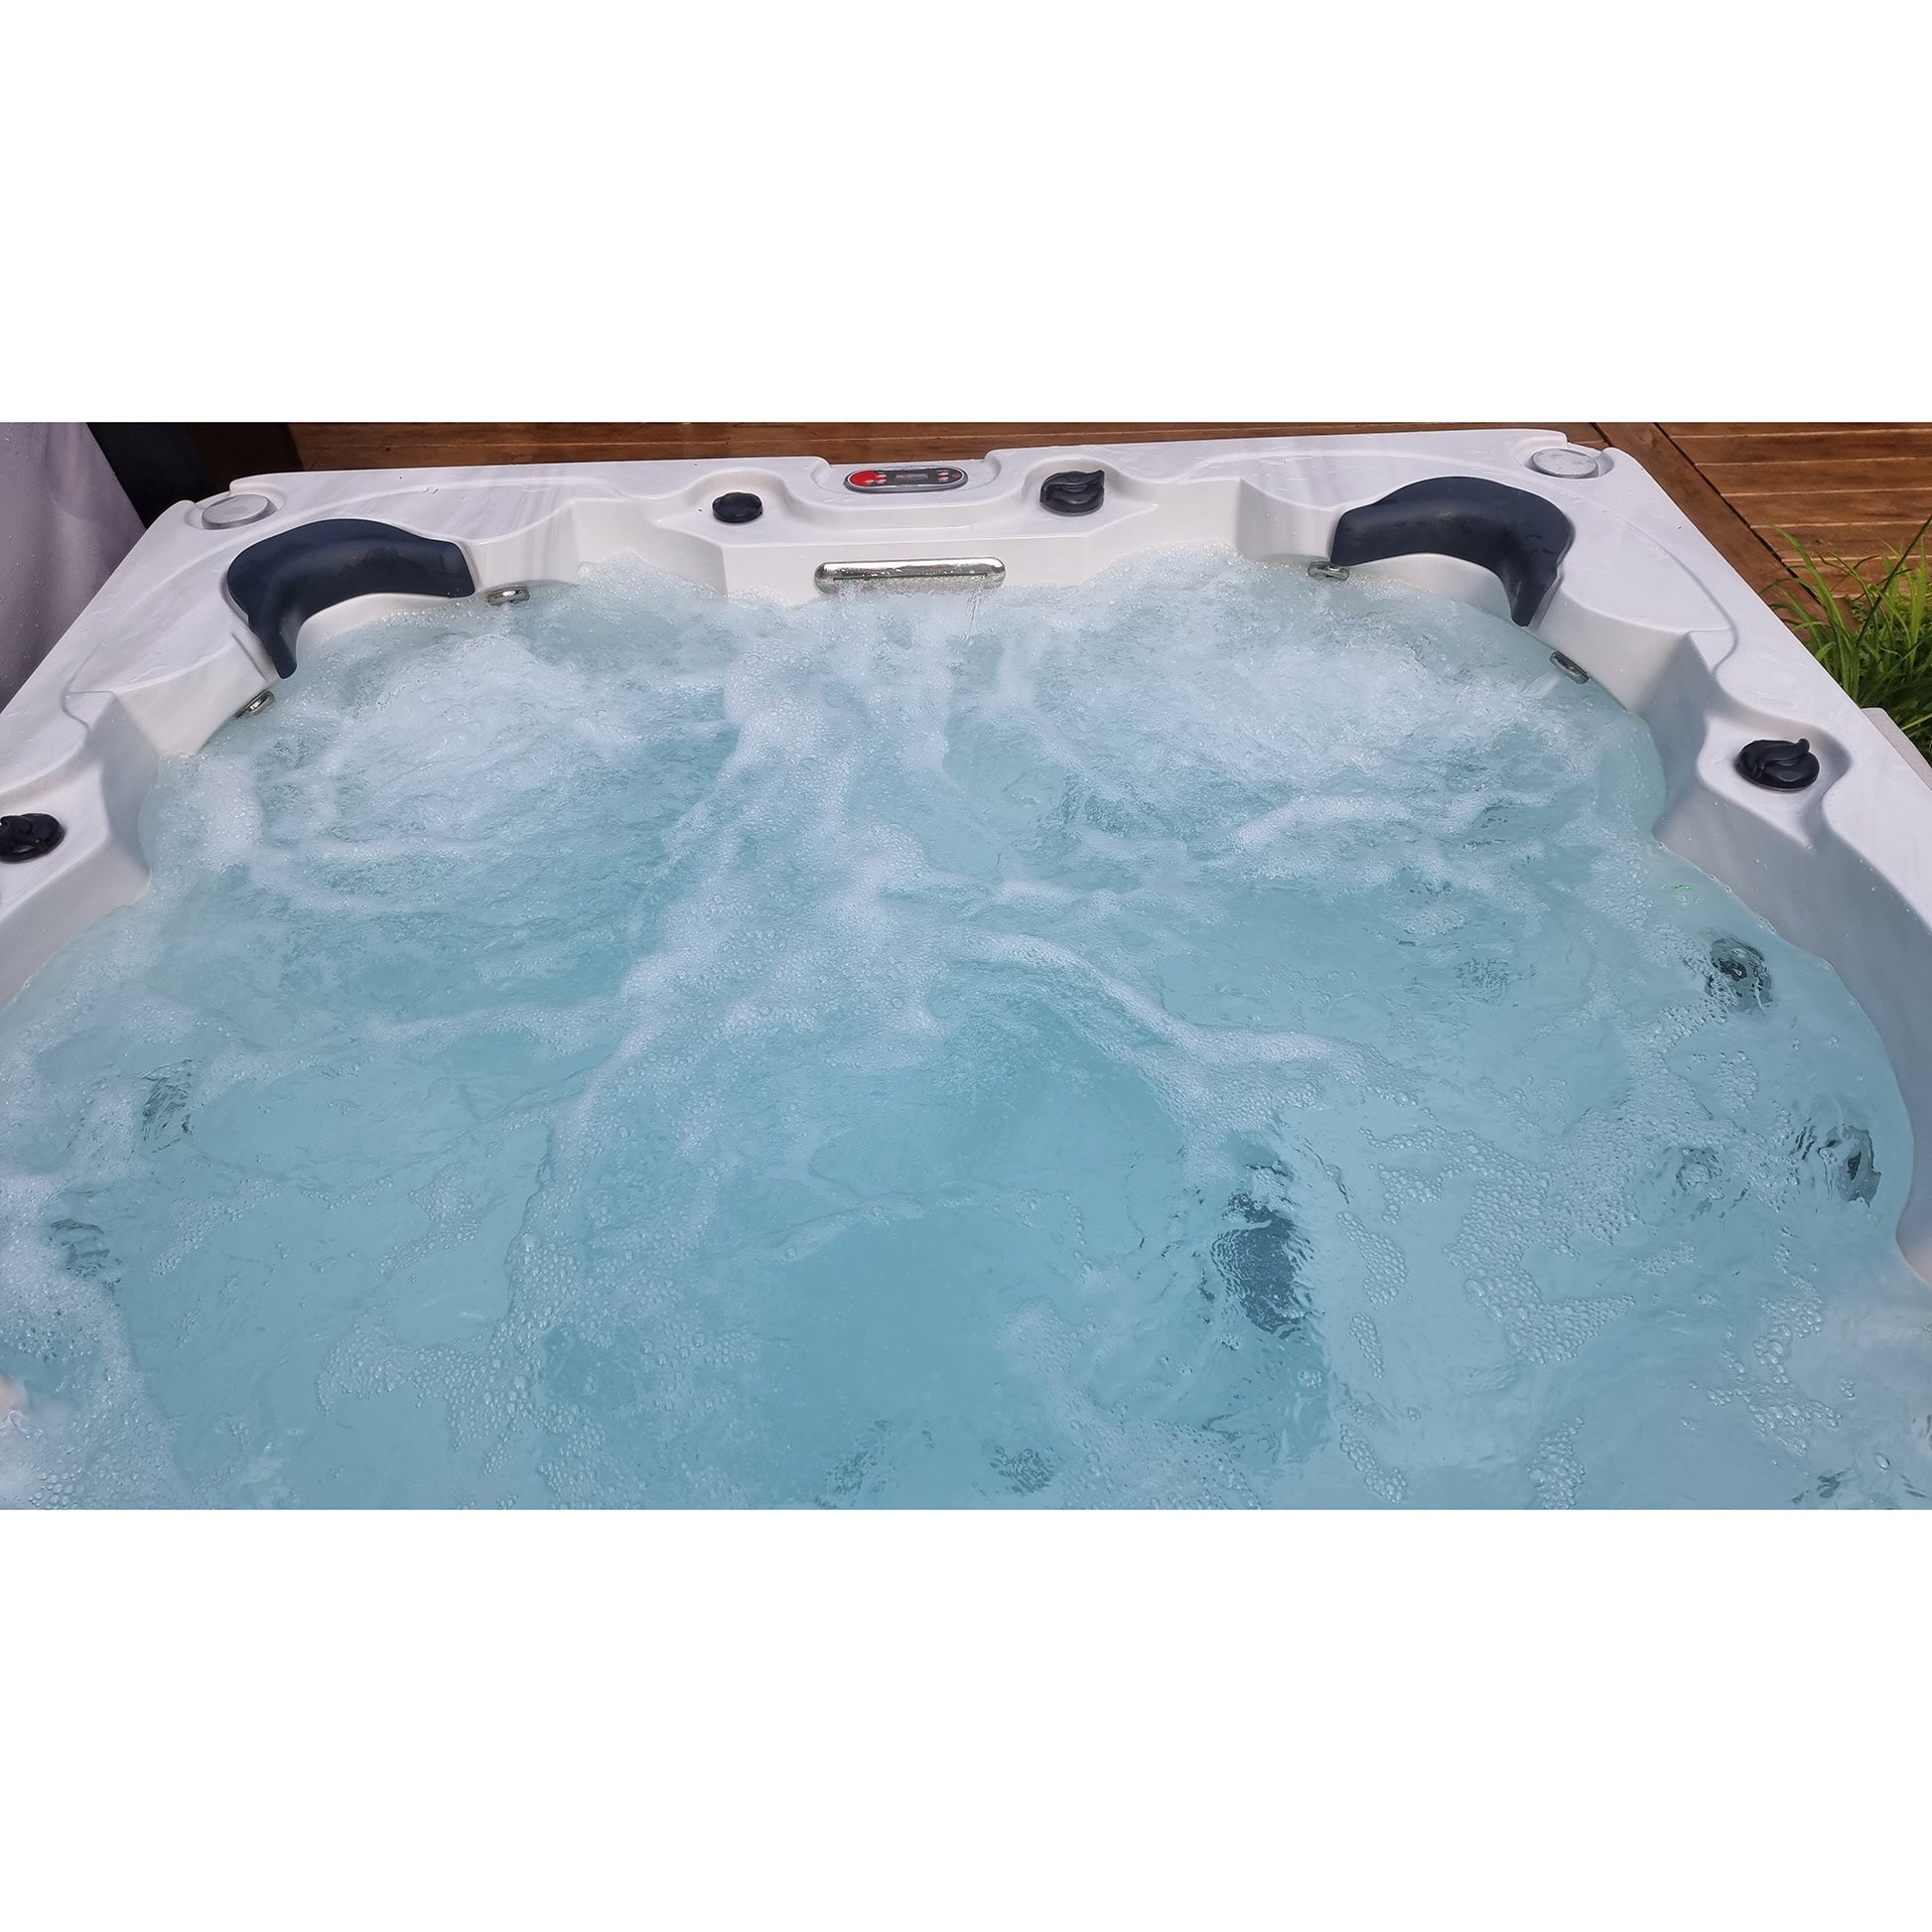 Canadian Spa Company_KH-10130_Erie_Square_6-Person_46 -Jet Hot Tub_Blackout Insulation_UV Light Water Care_Lounger